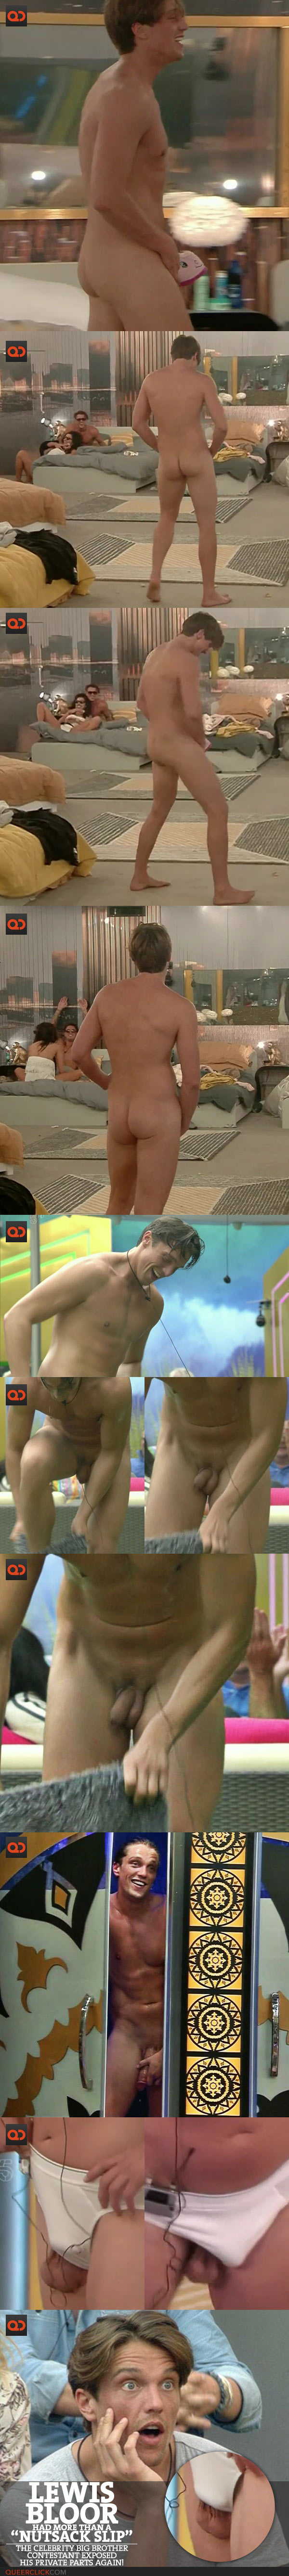 Lewis Bloor Had More Than A “NutSack Slip” The Celebrity Big Brother Contestant Exposed His Private Parts… Again!